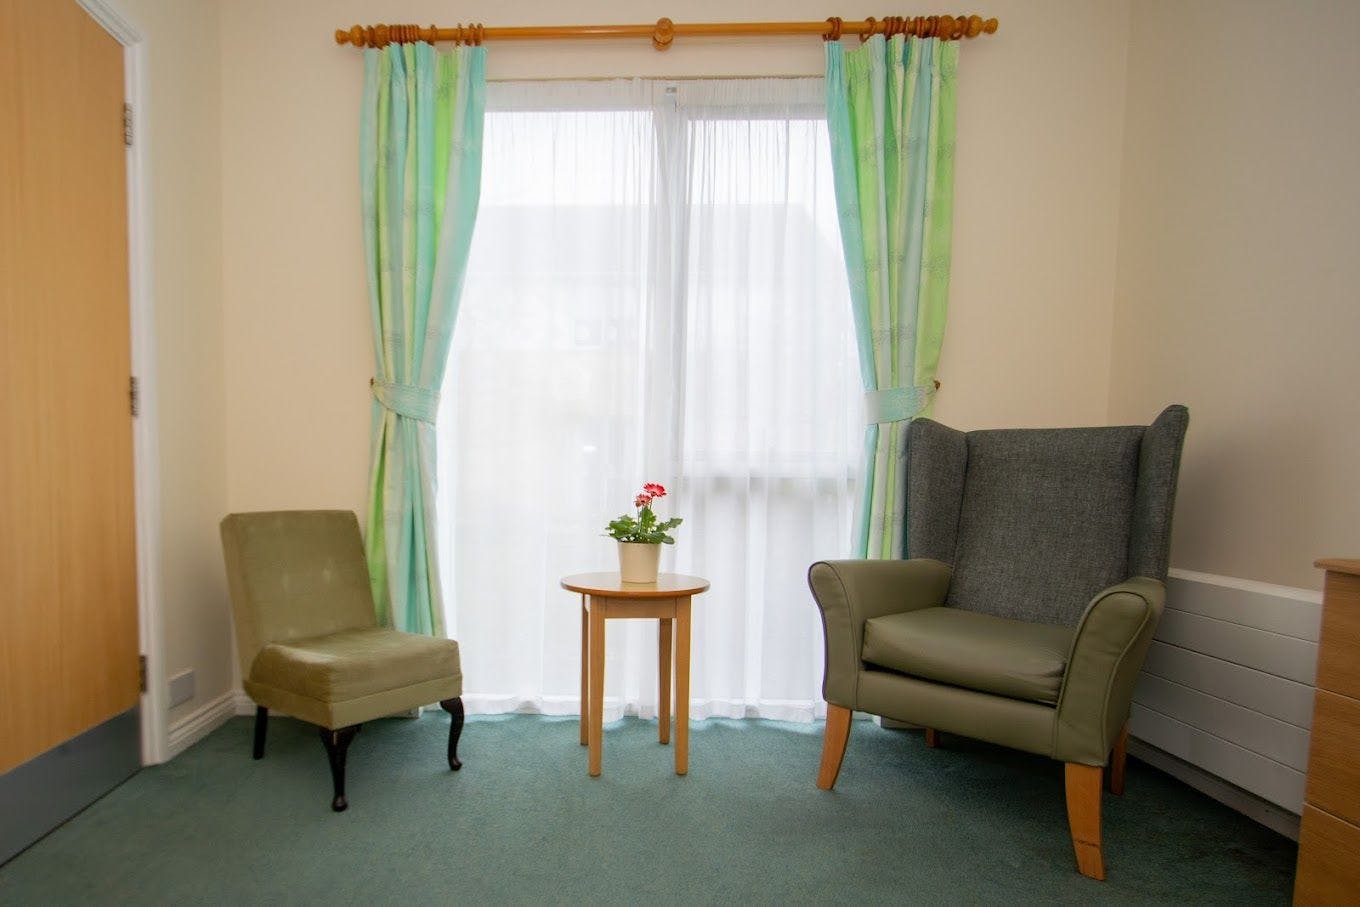 Shaw Healthcare - Abbott House care home 007